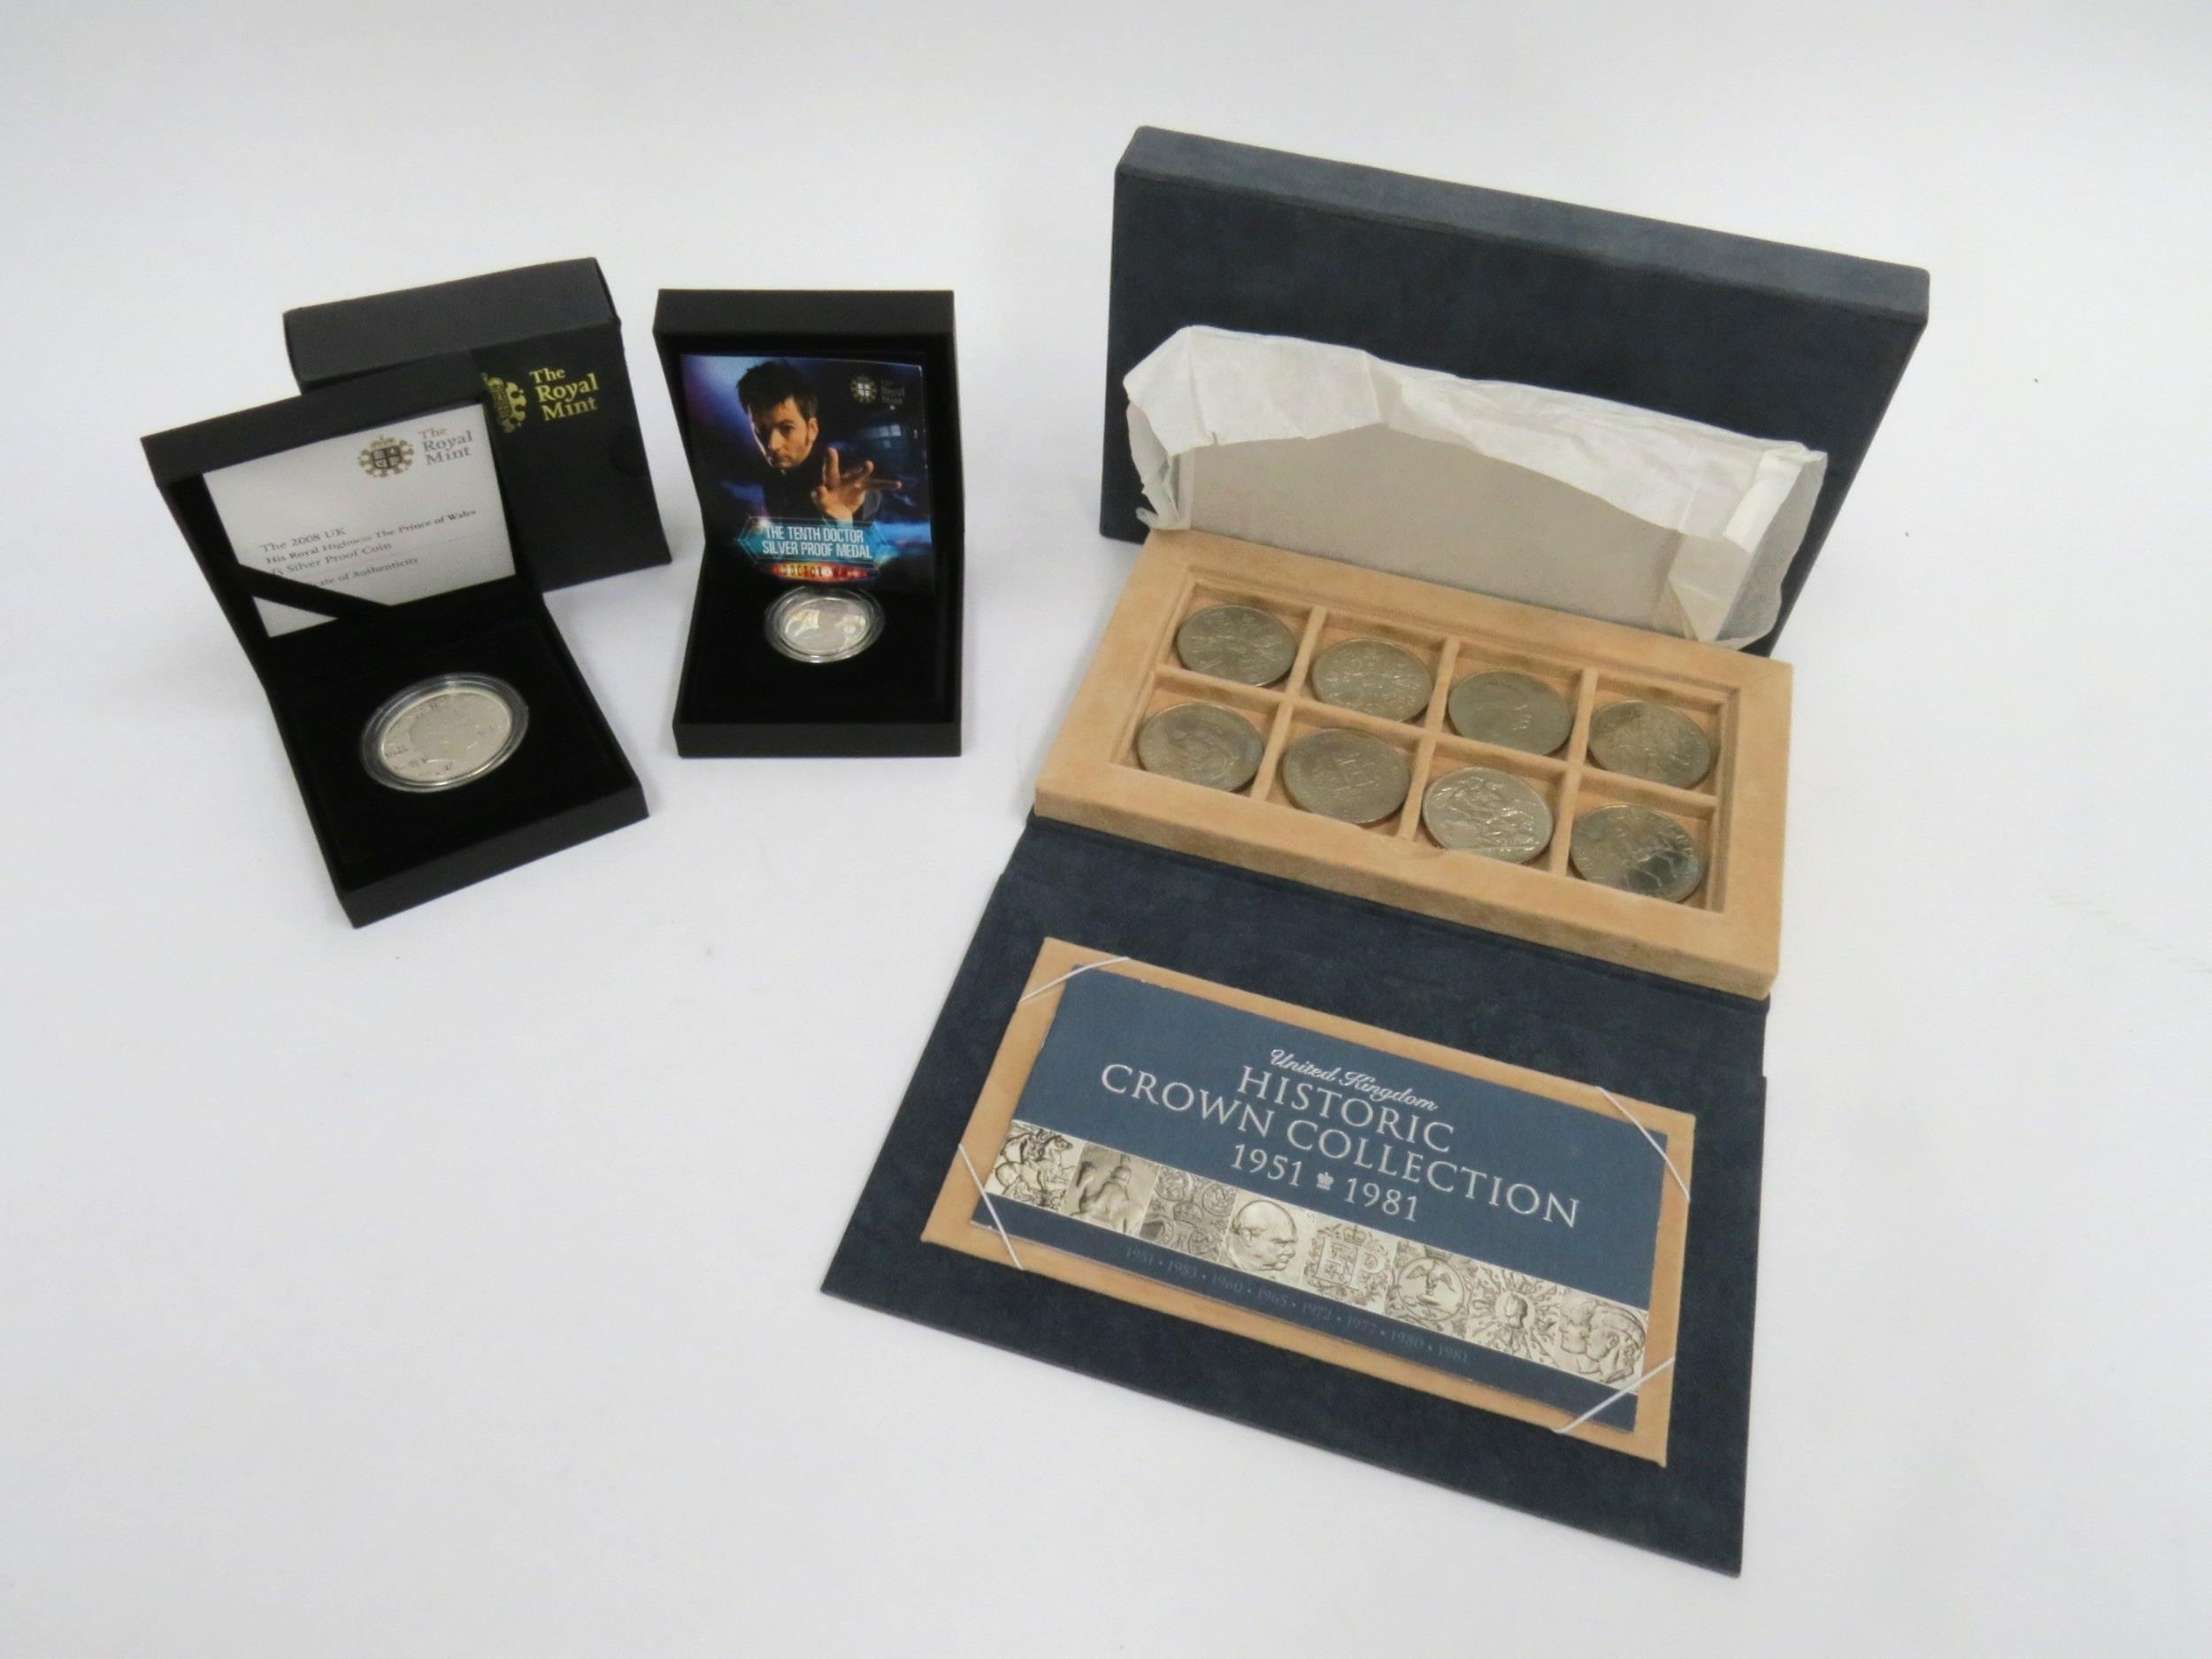 A collection of Royal Mint historical presented sets - "Lost At Sea 1784", two silver £1